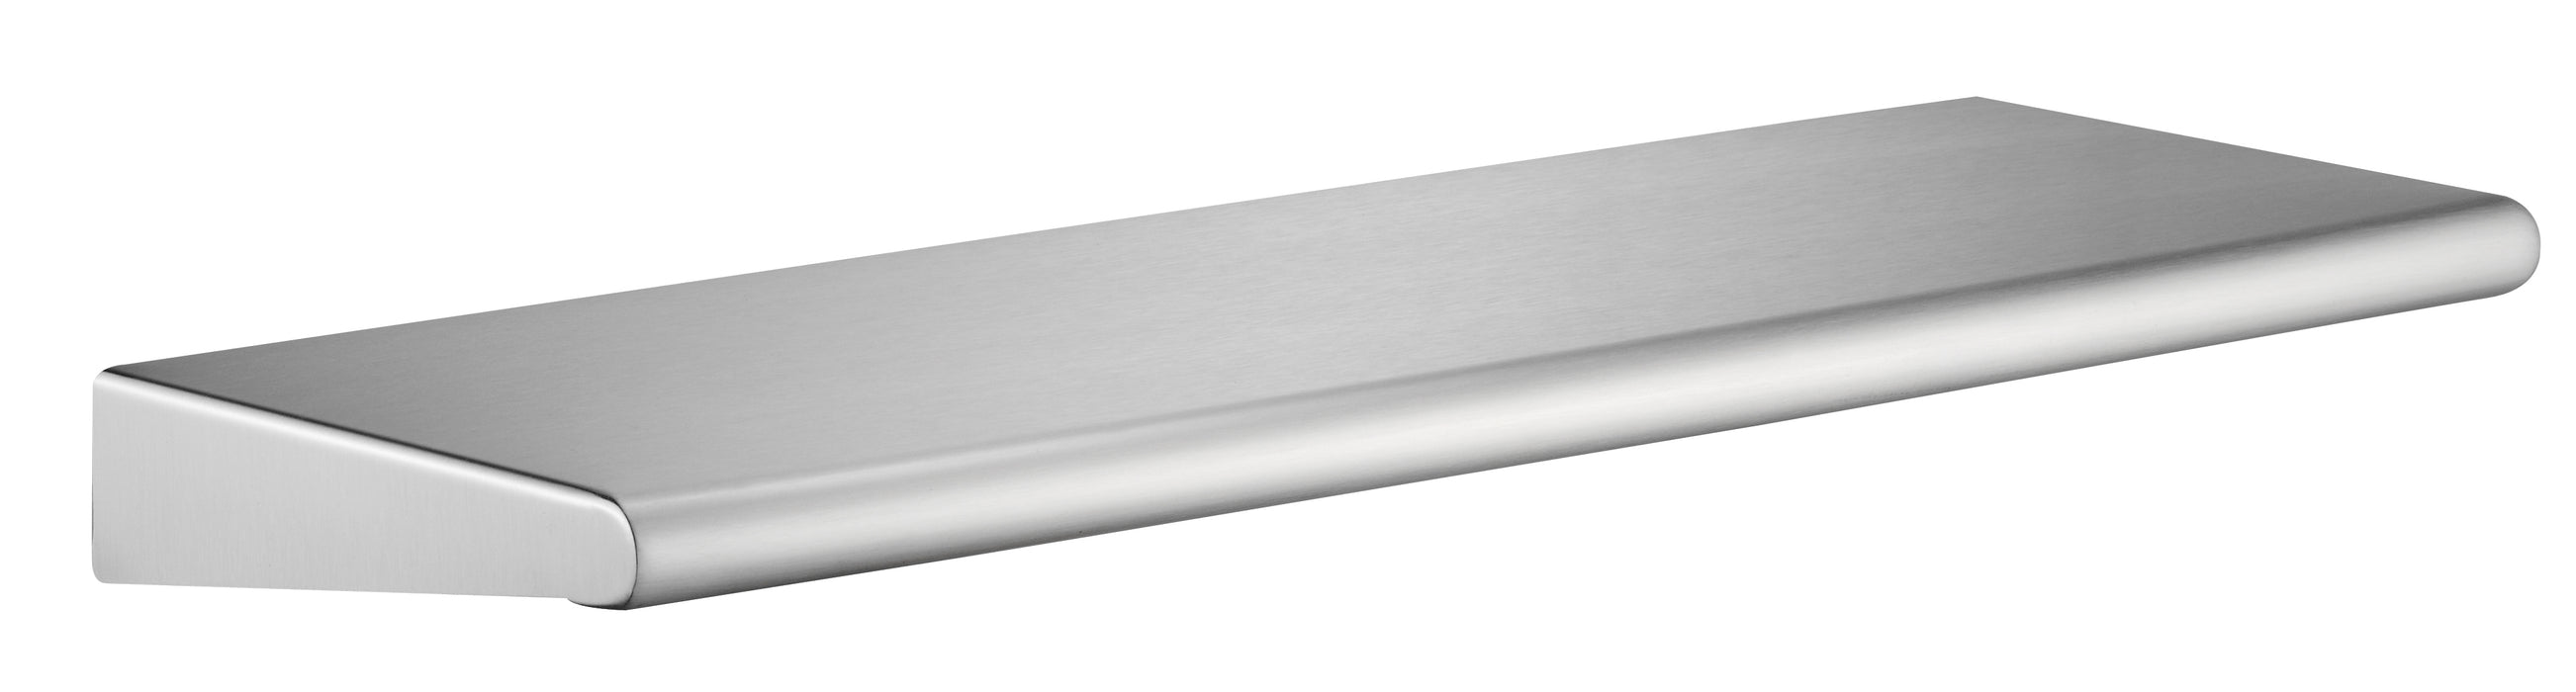 ASI 20692-624 Surface Mounted Shelf, Stainless Steel, 6 X 24 Inch